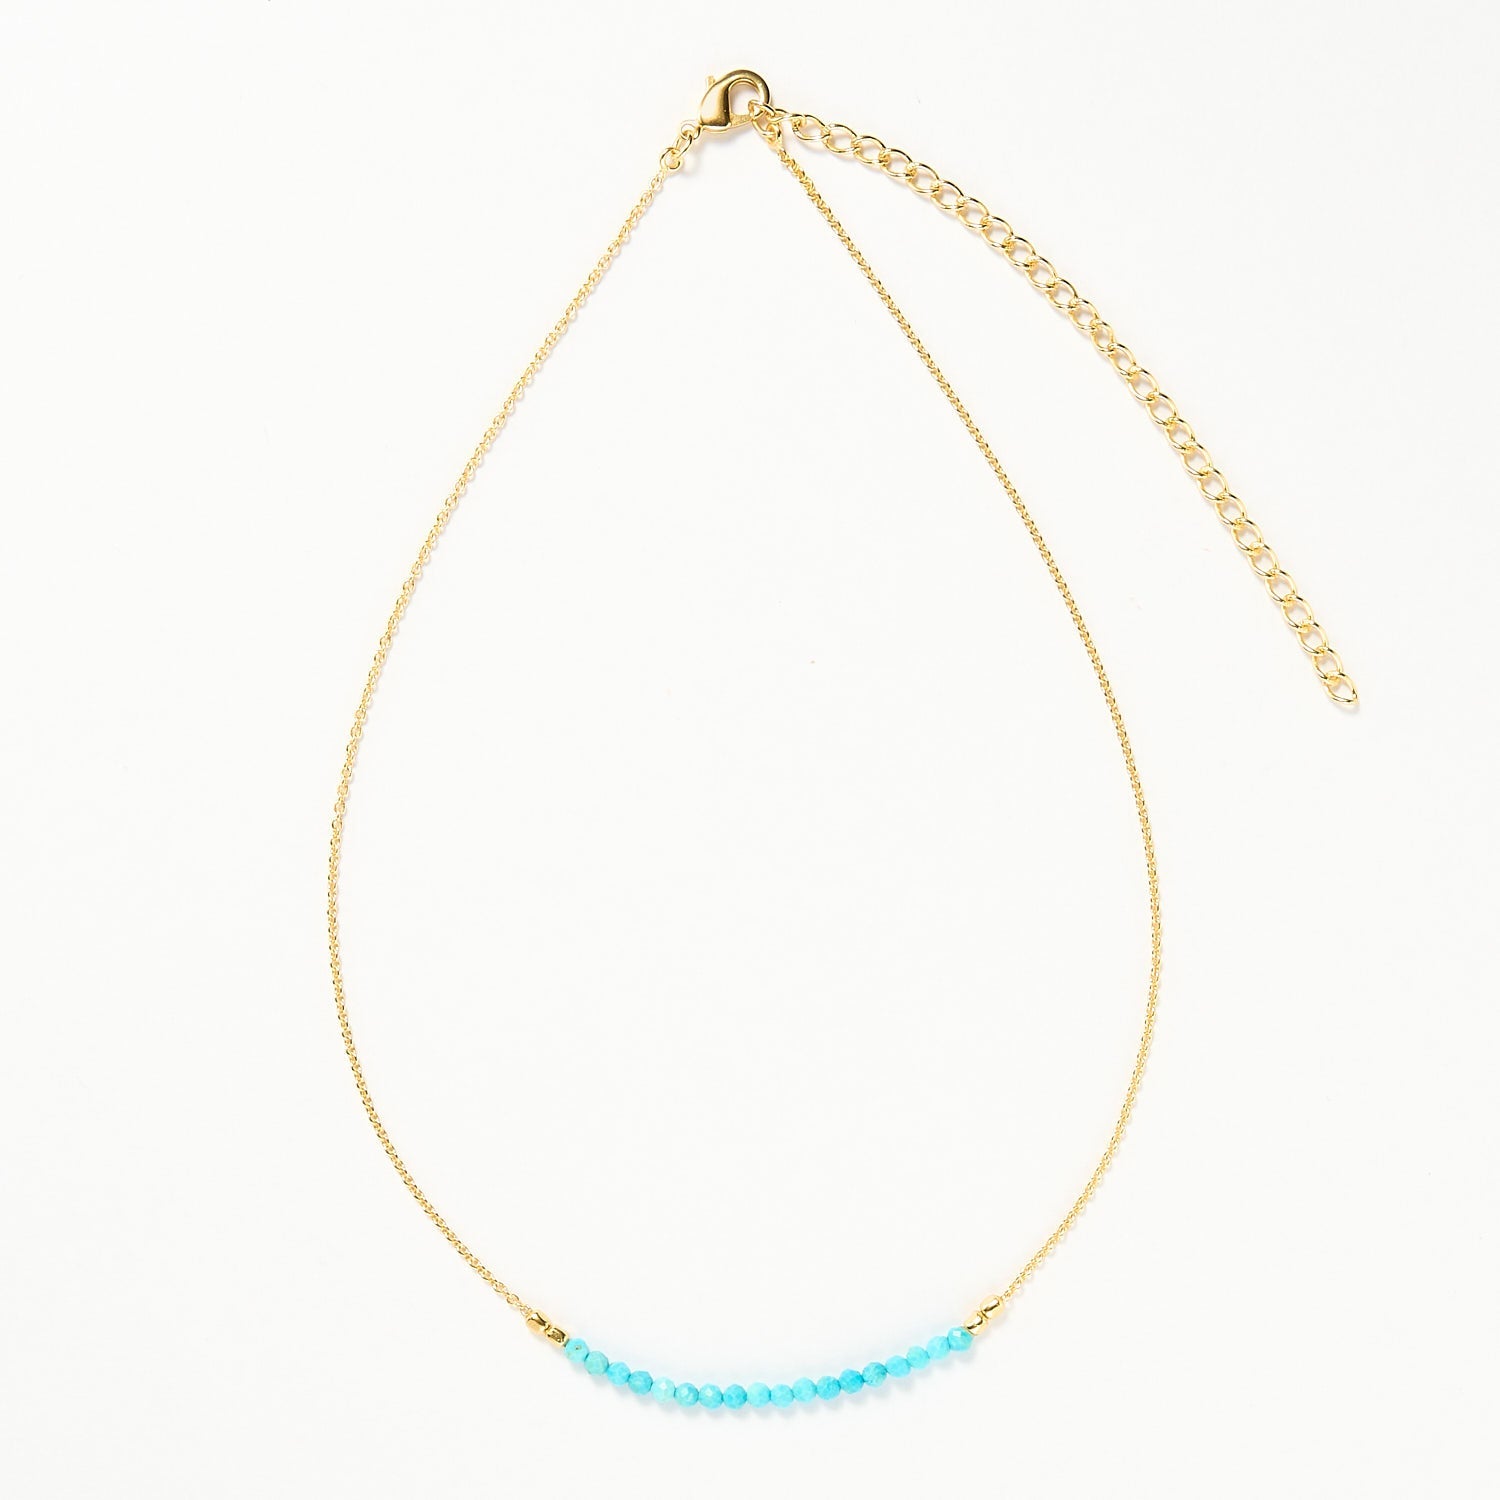 Koh Tao beaded necklace - Turquoise, Gold 